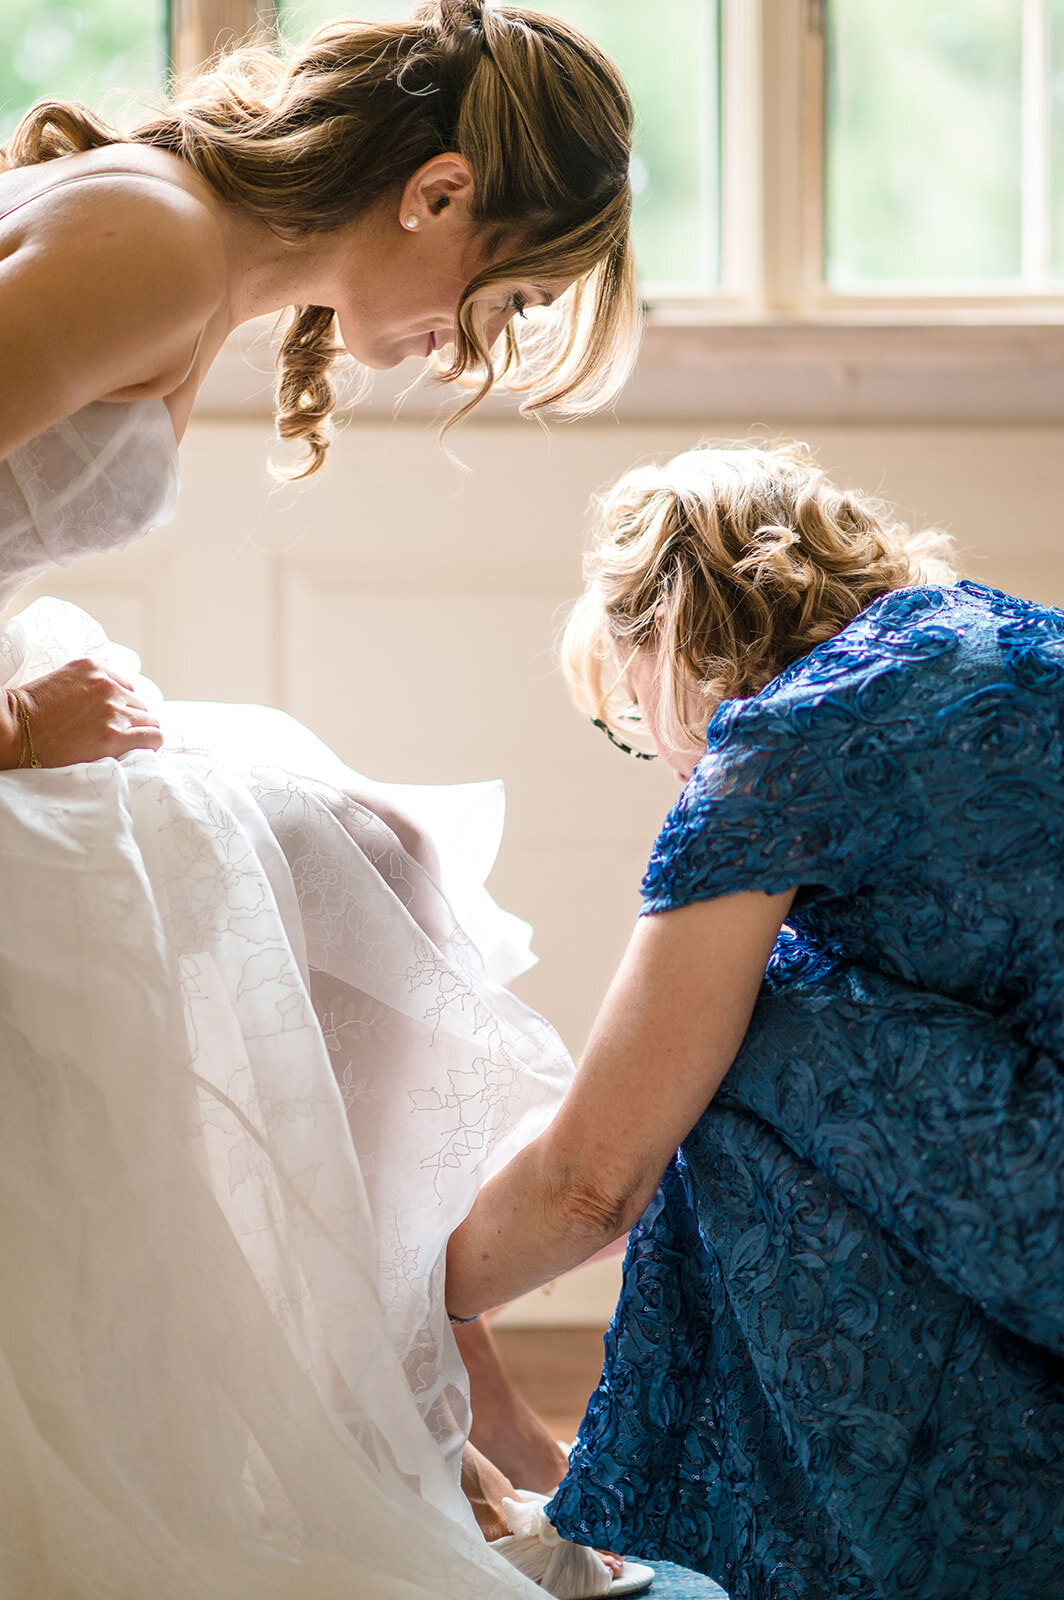 A woman helping a bride up on her shoes.